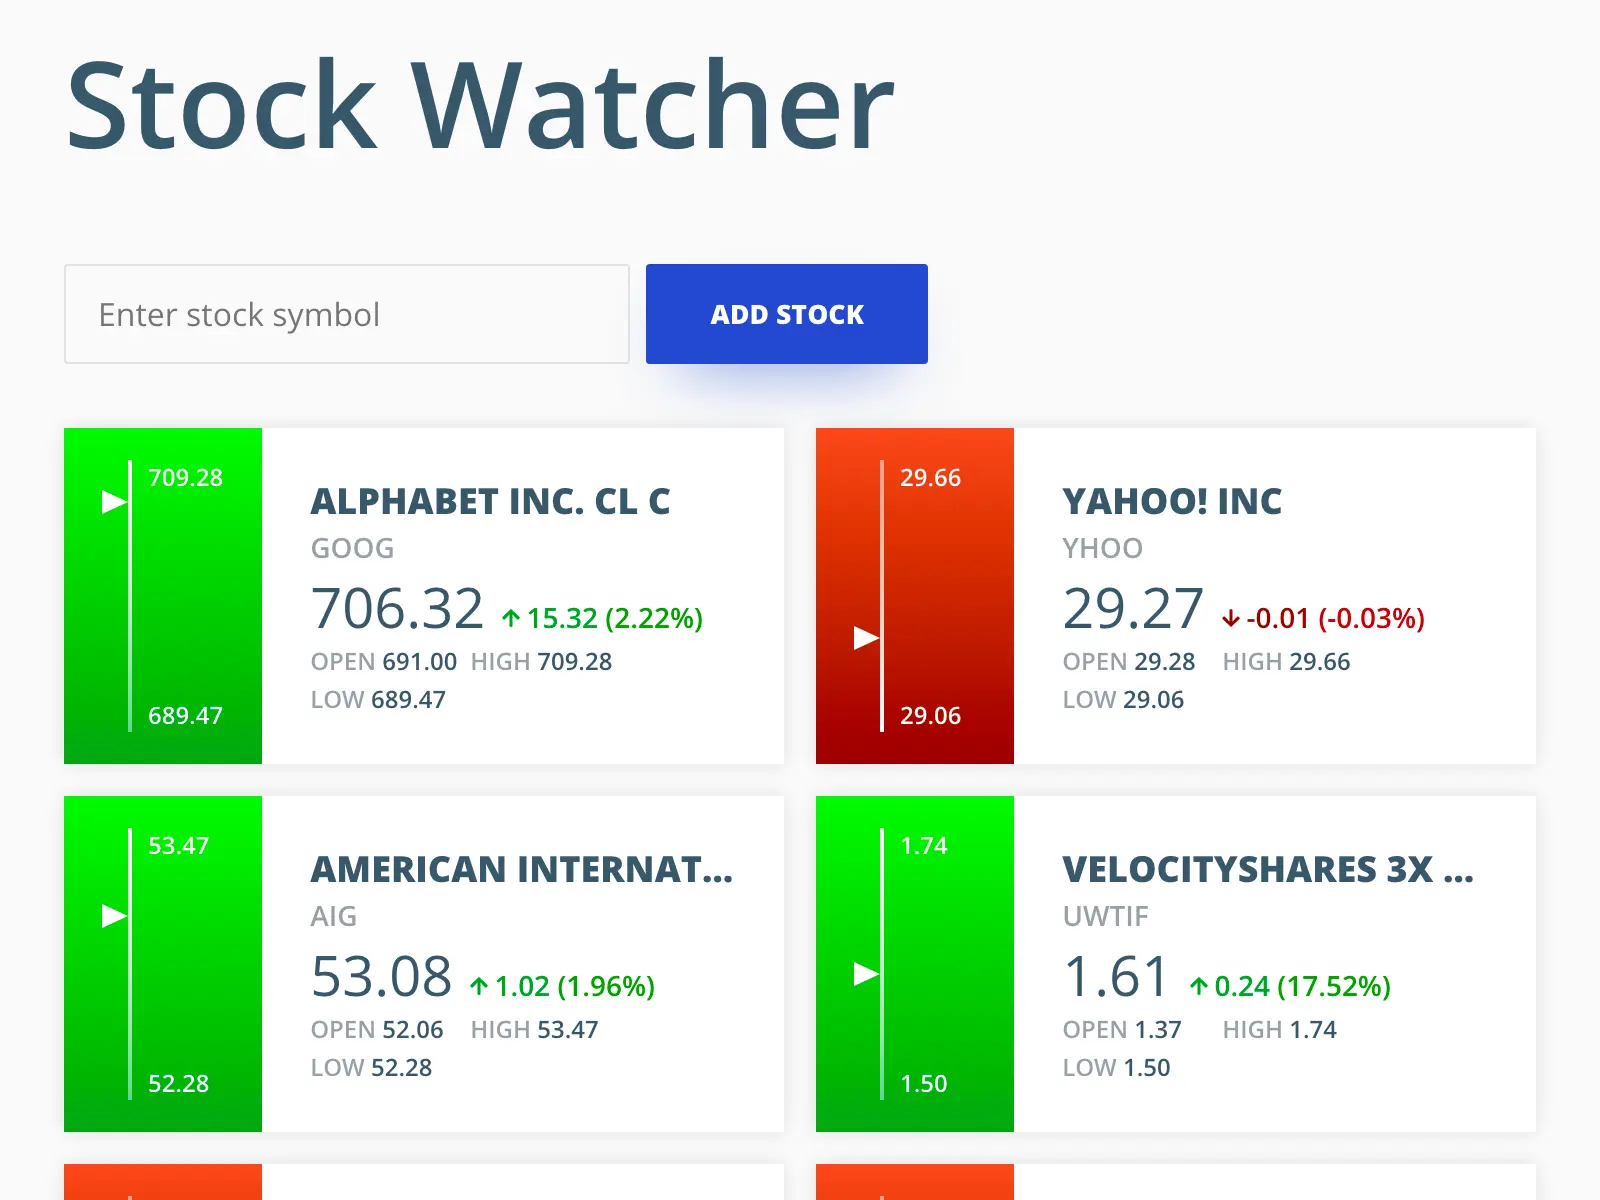 "Stock Watcher" dashboard showing various stocks and details about them